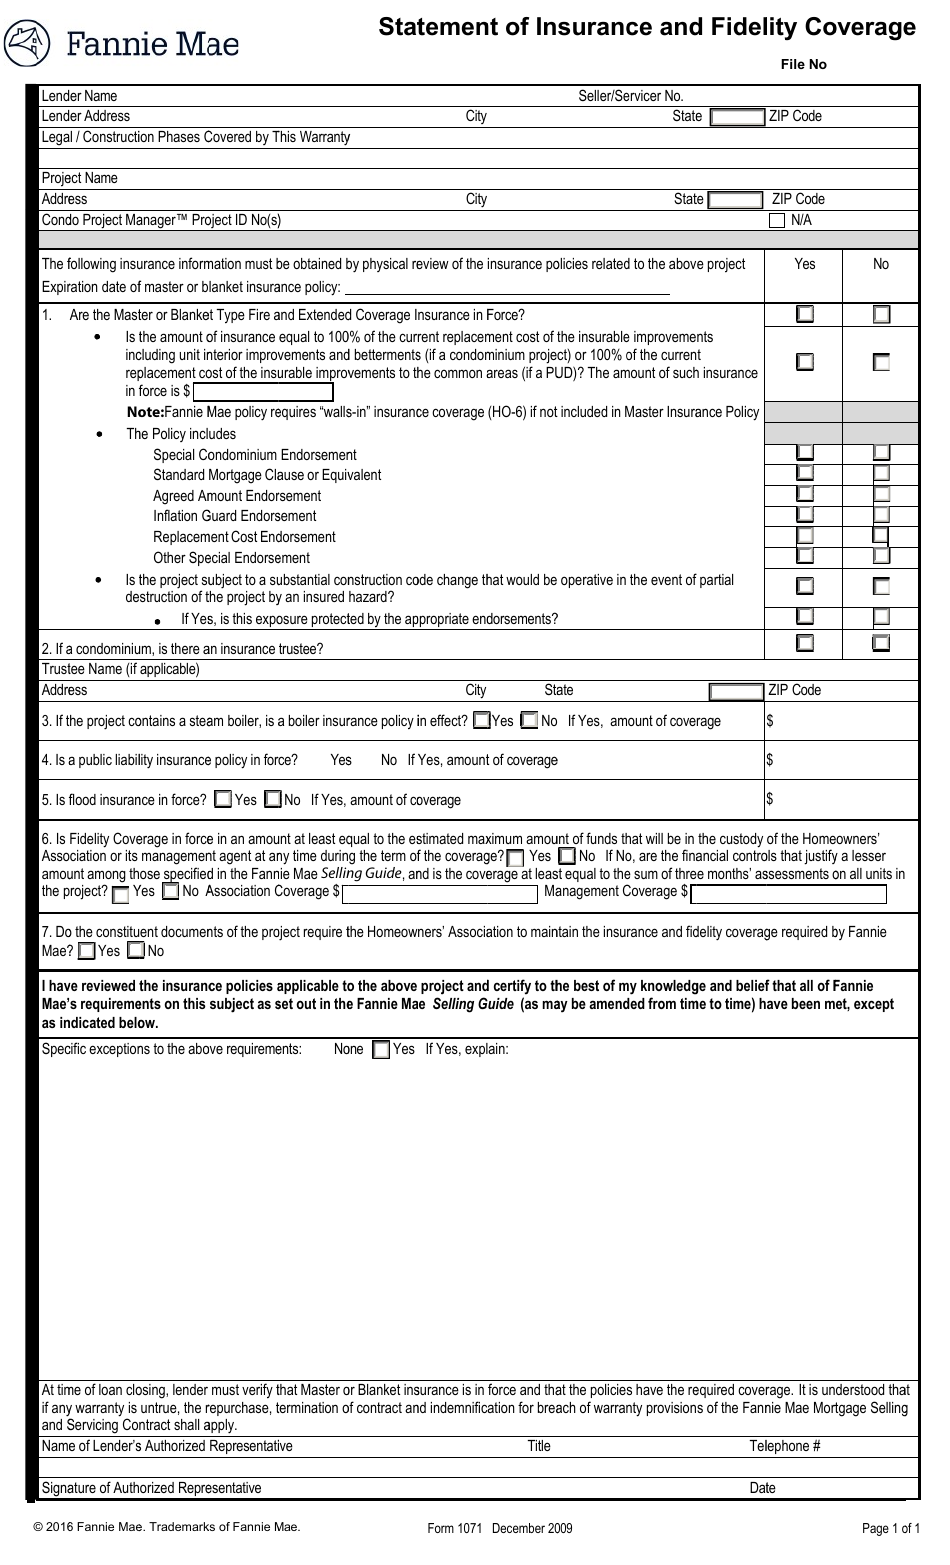 Form 1071 Statement of Insurance and Fidelity Coverage, Page 1